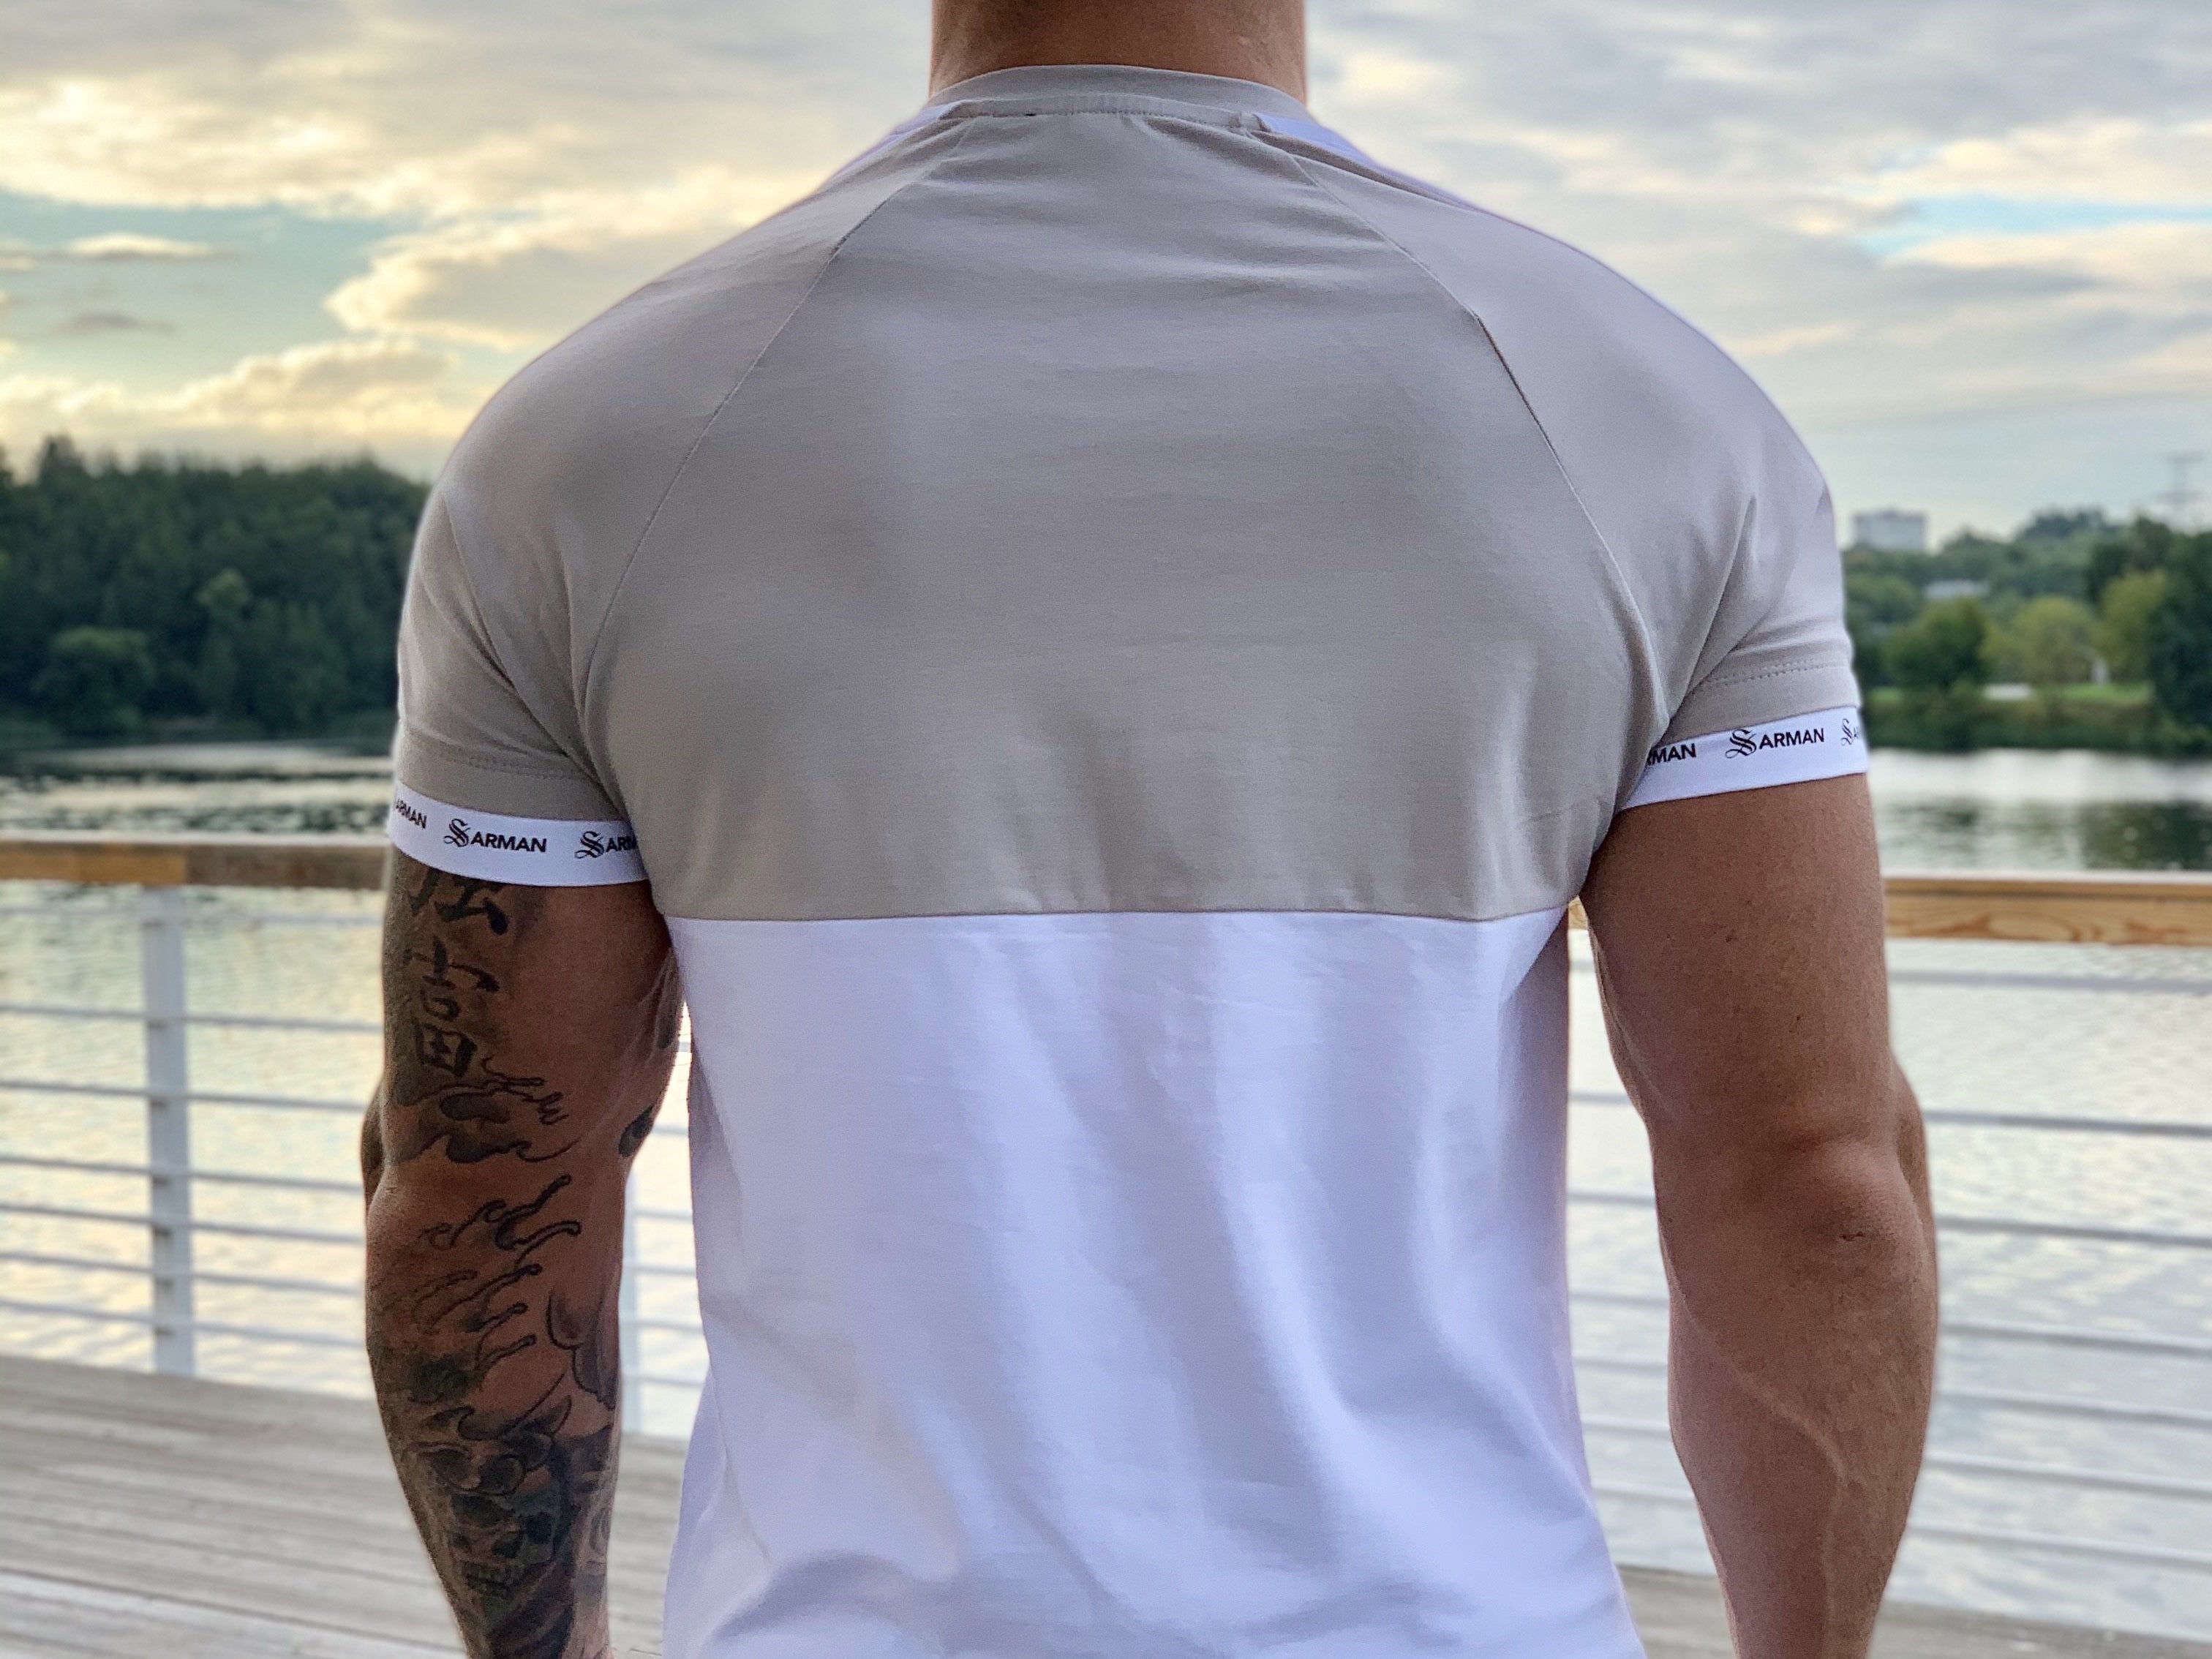 Almighty - White/Grey T-shirt for Men (PRE-ORDER DISPATCH DATE 25 SEPTEMBER) - Sarman Fashion - Wholesale Clothing Fashion Brand for Men from Canada